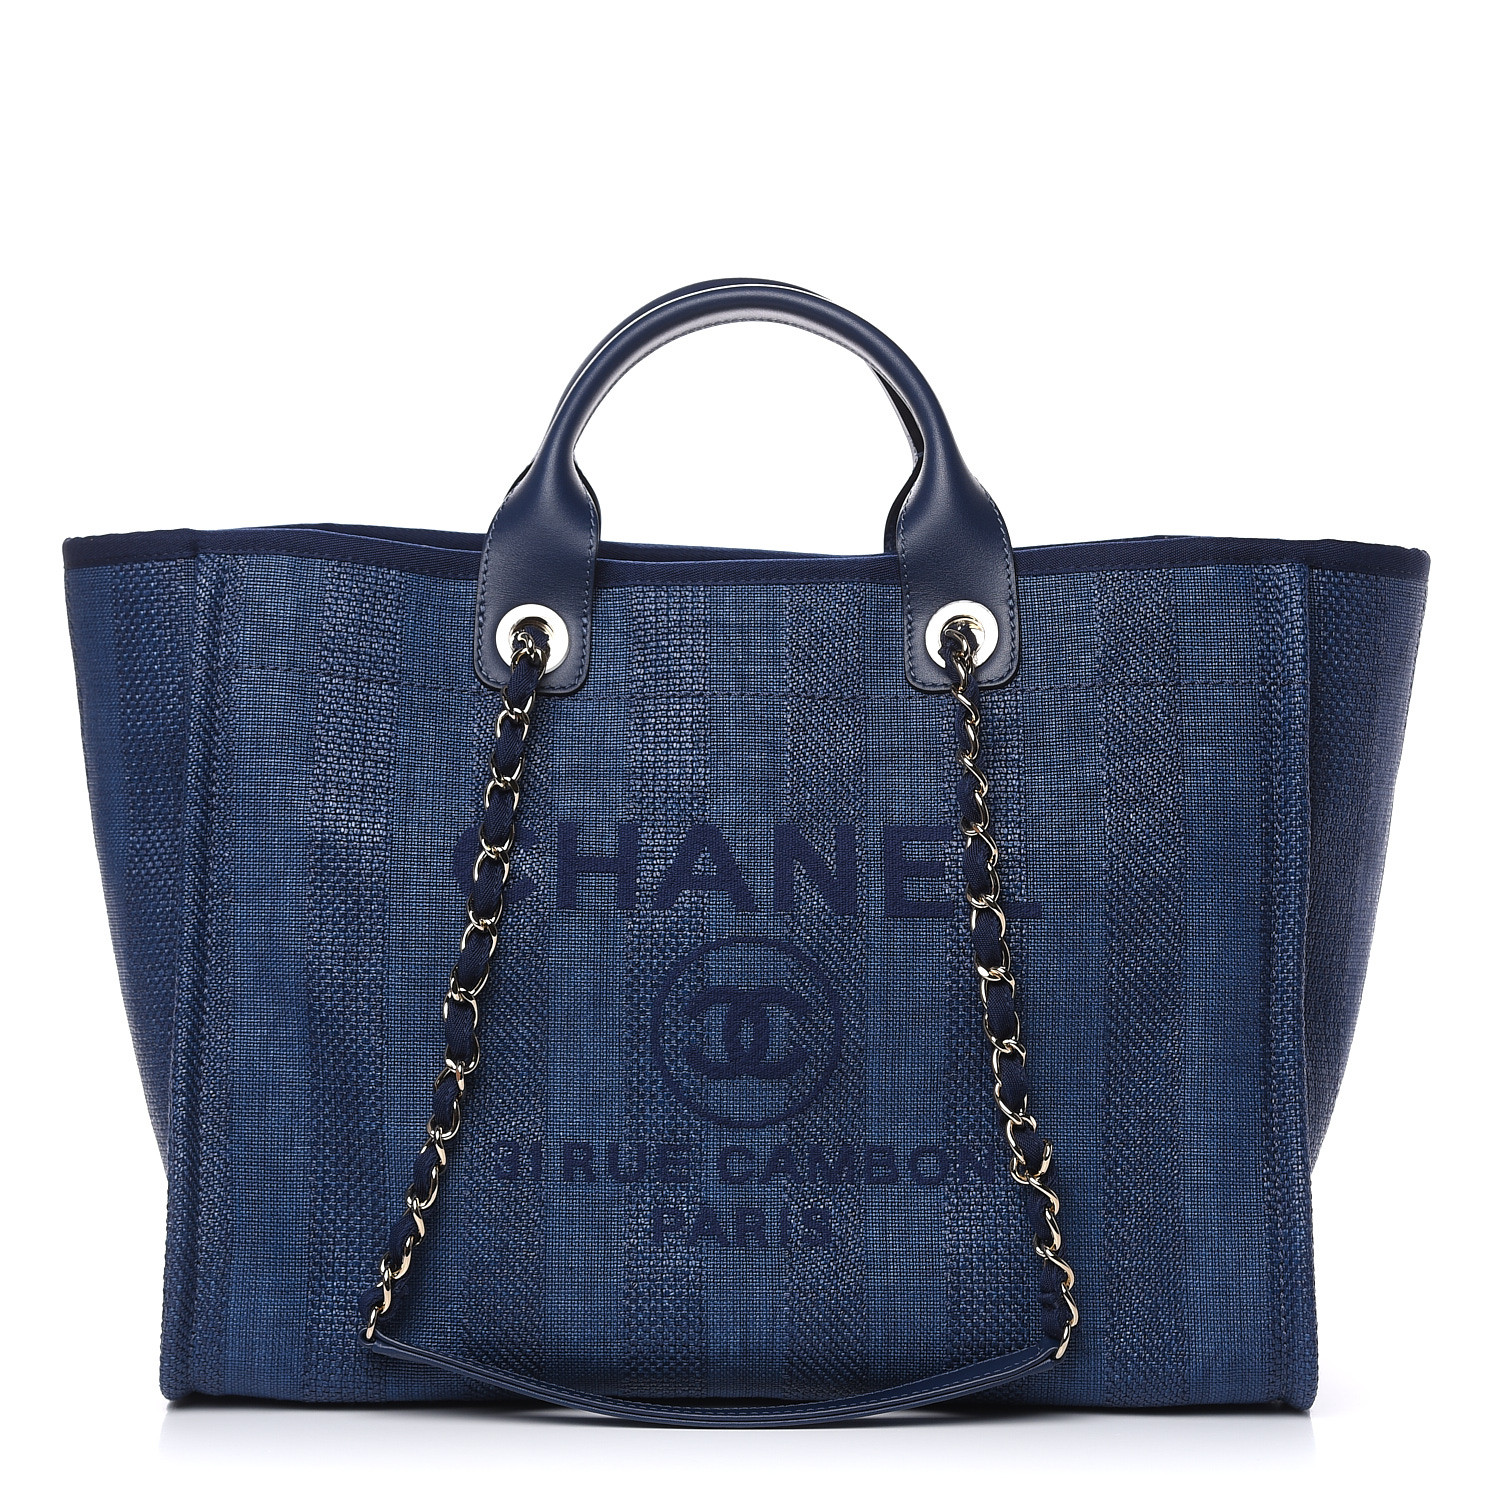 CHANEL Woven Straw Raffia Striped Large Deauville Tote Navy Blue 495239